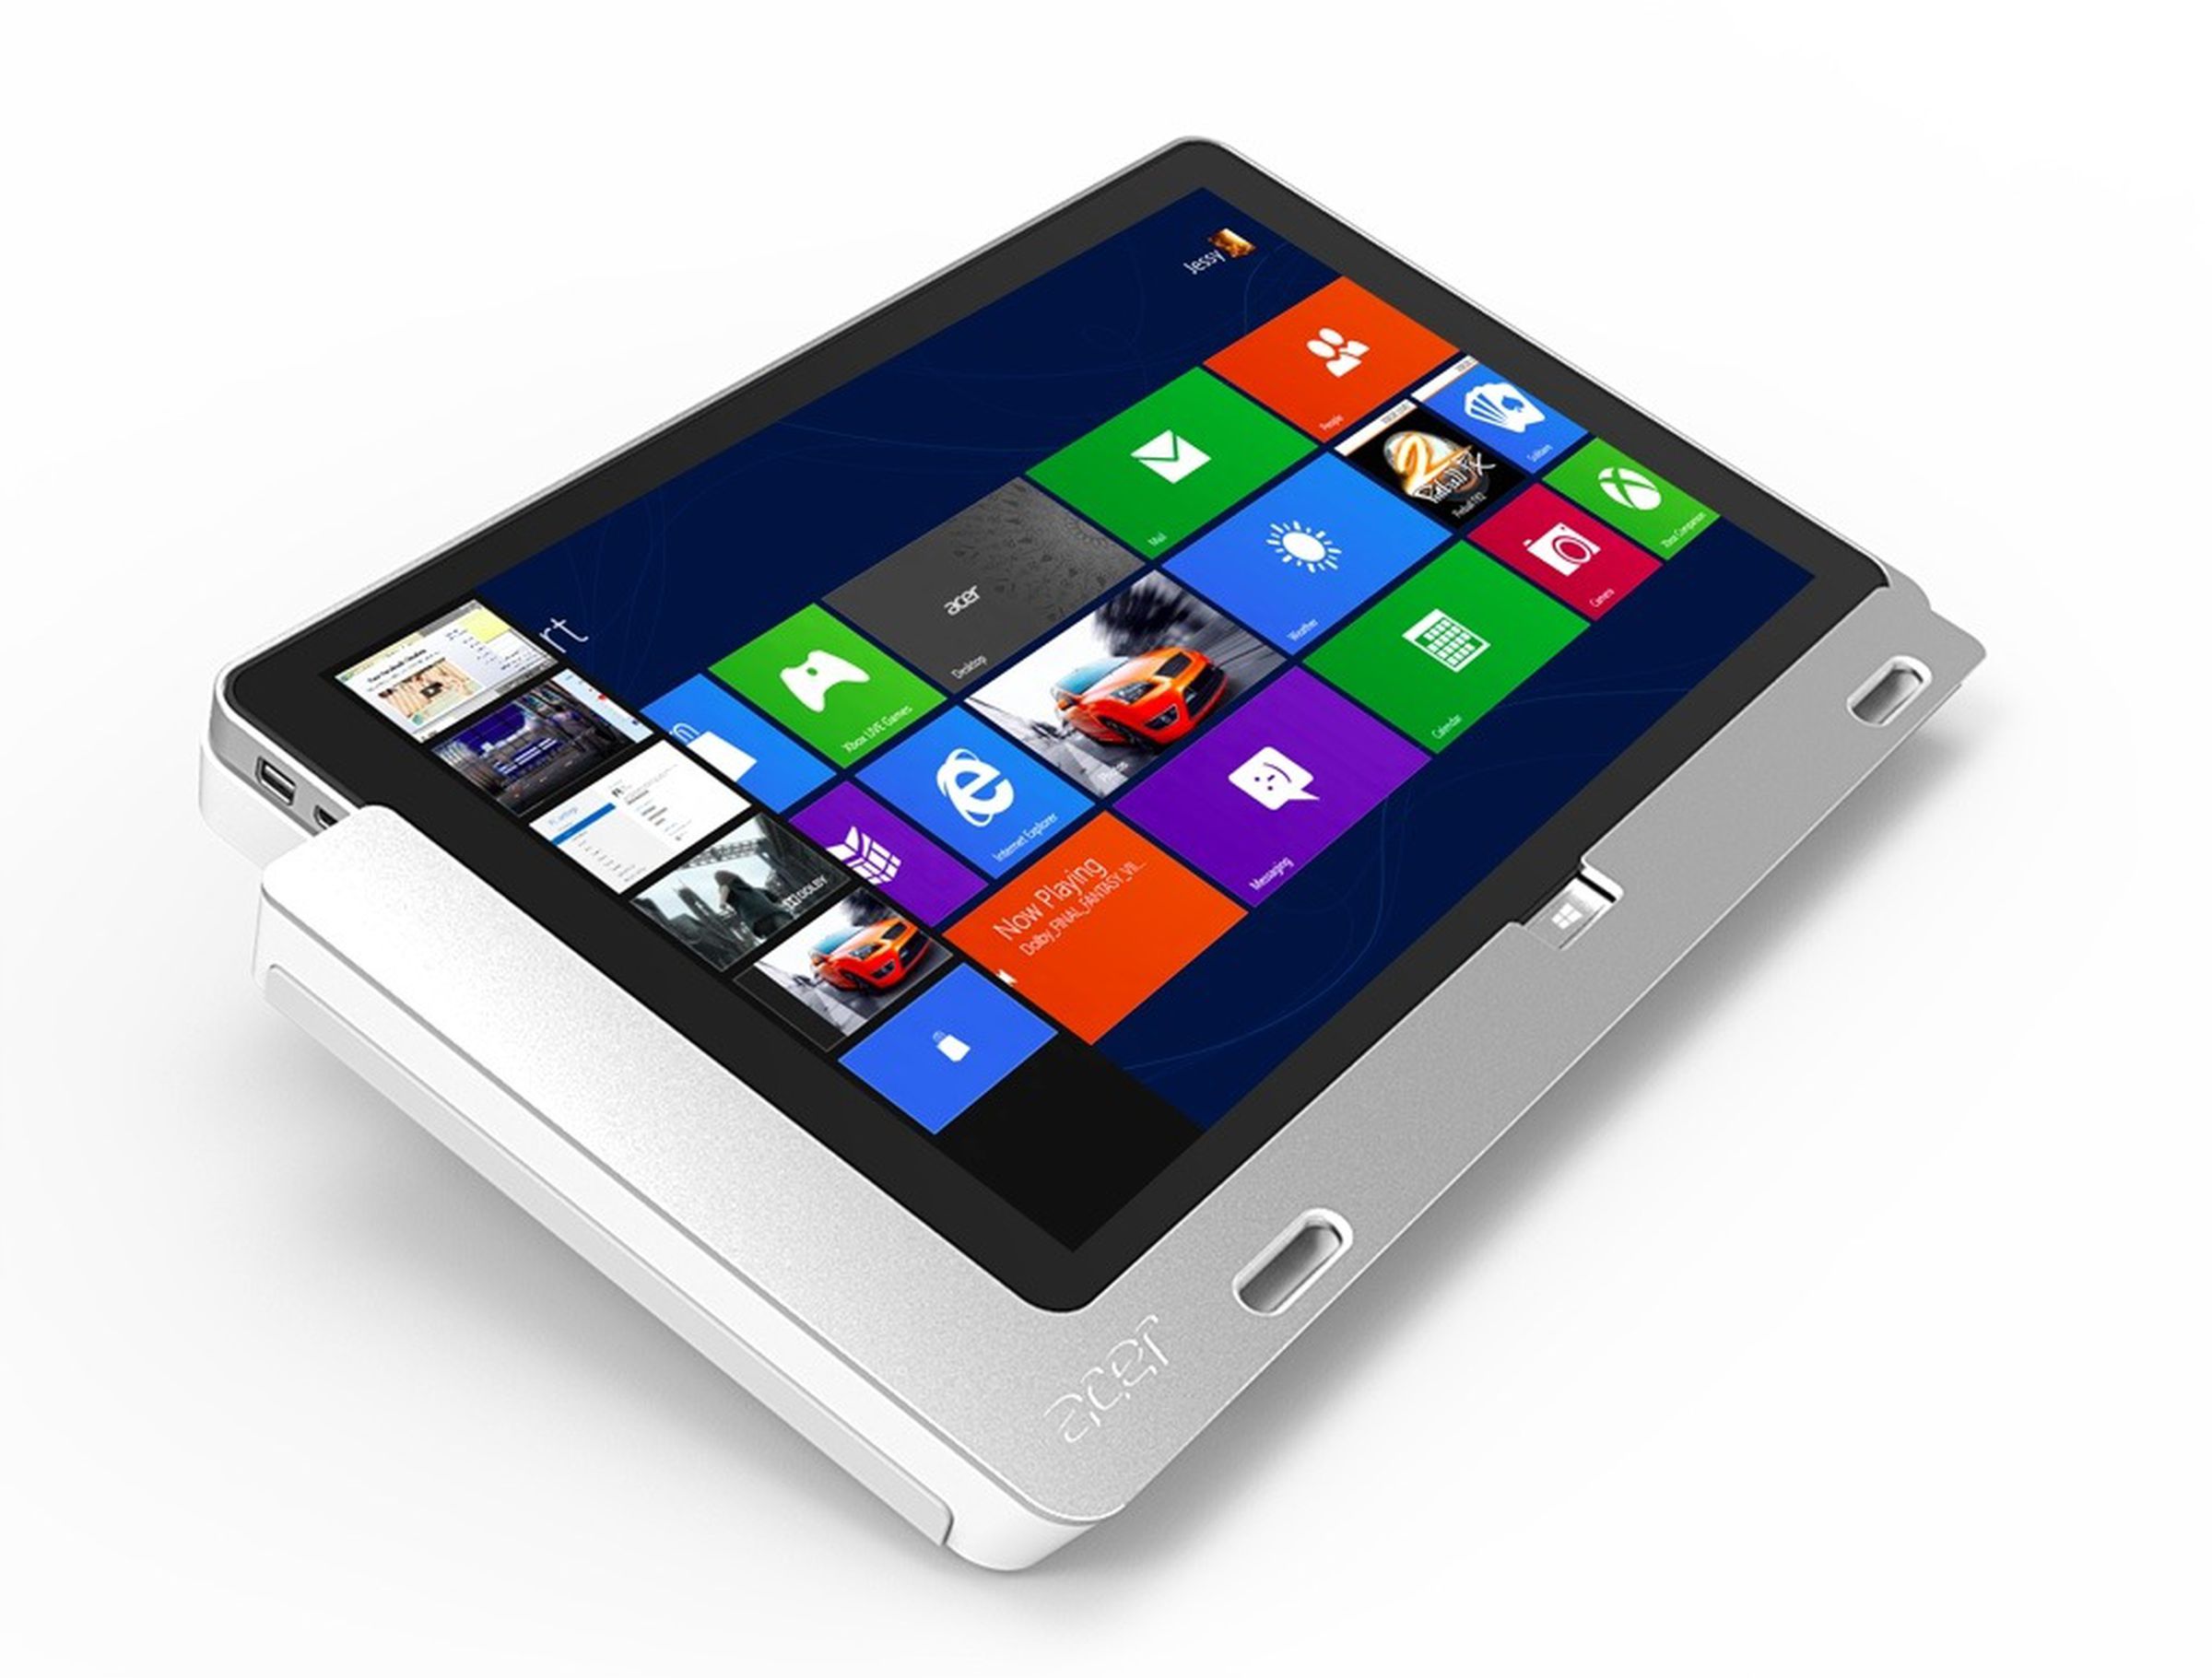 Acer ICONIA W700 Windows 8 tablet